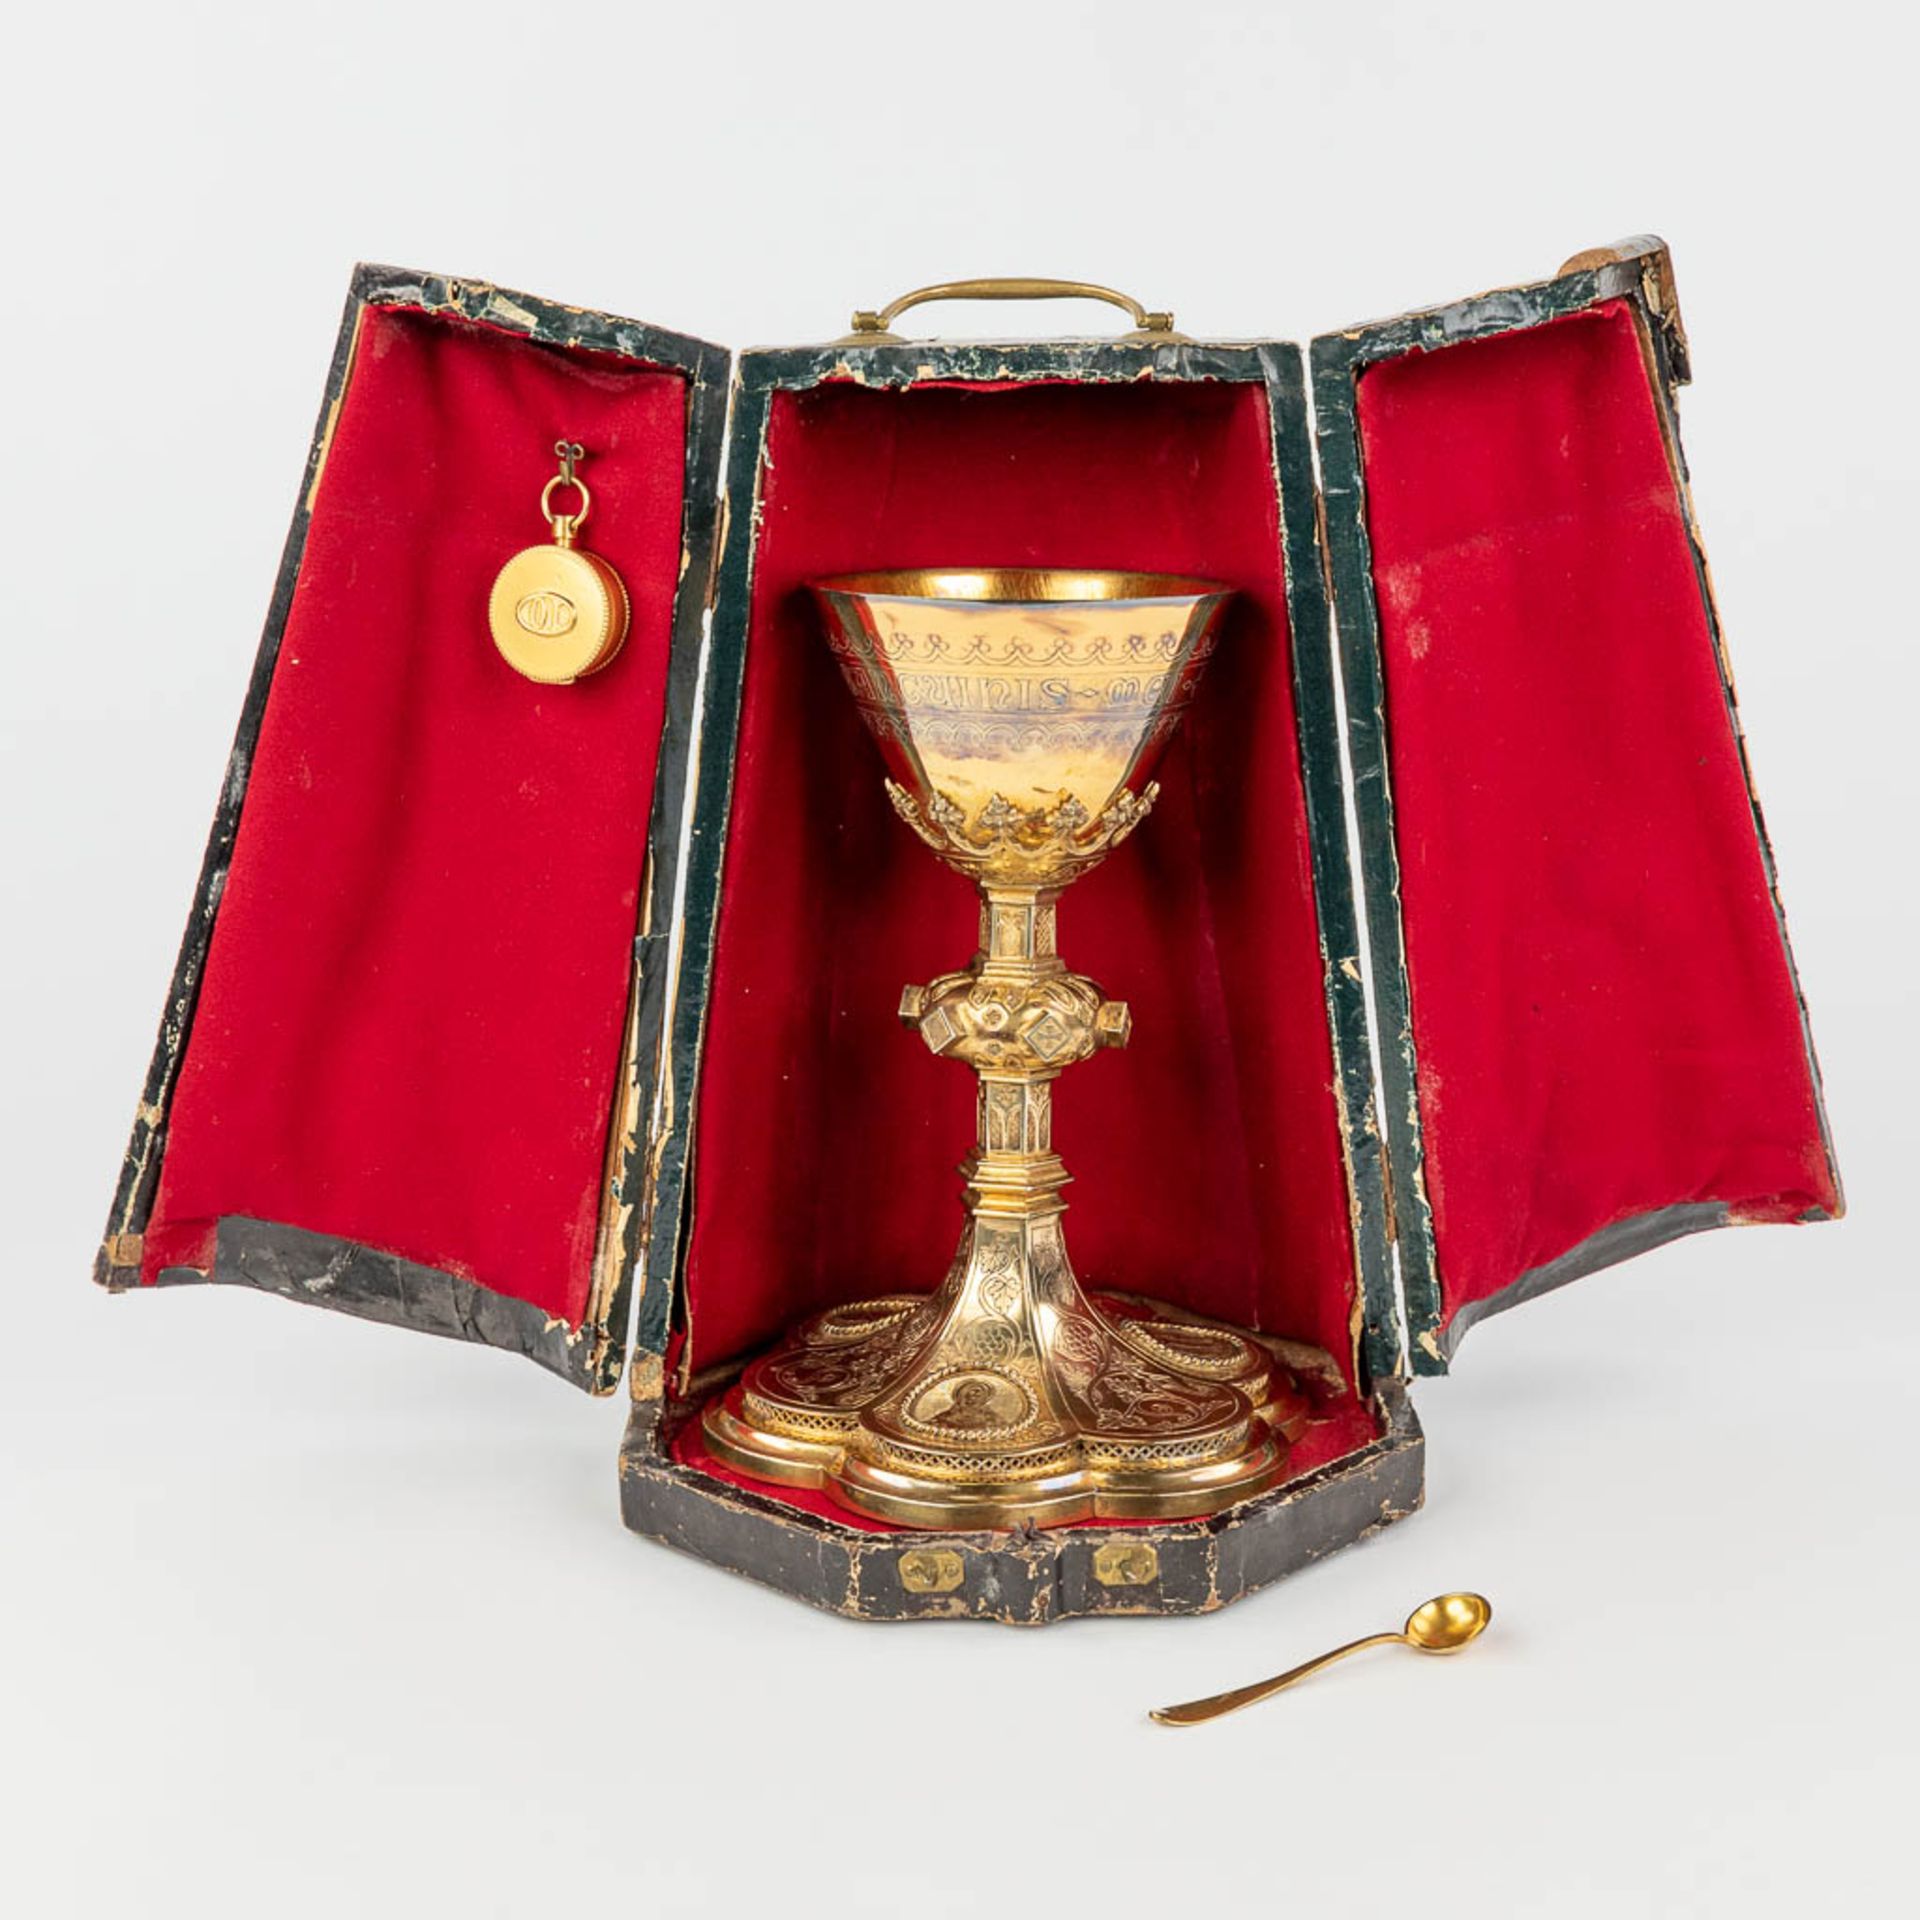 A gothic revival chalice with paten, spoon and sacramental bread box in the original box. (H:22,5 x